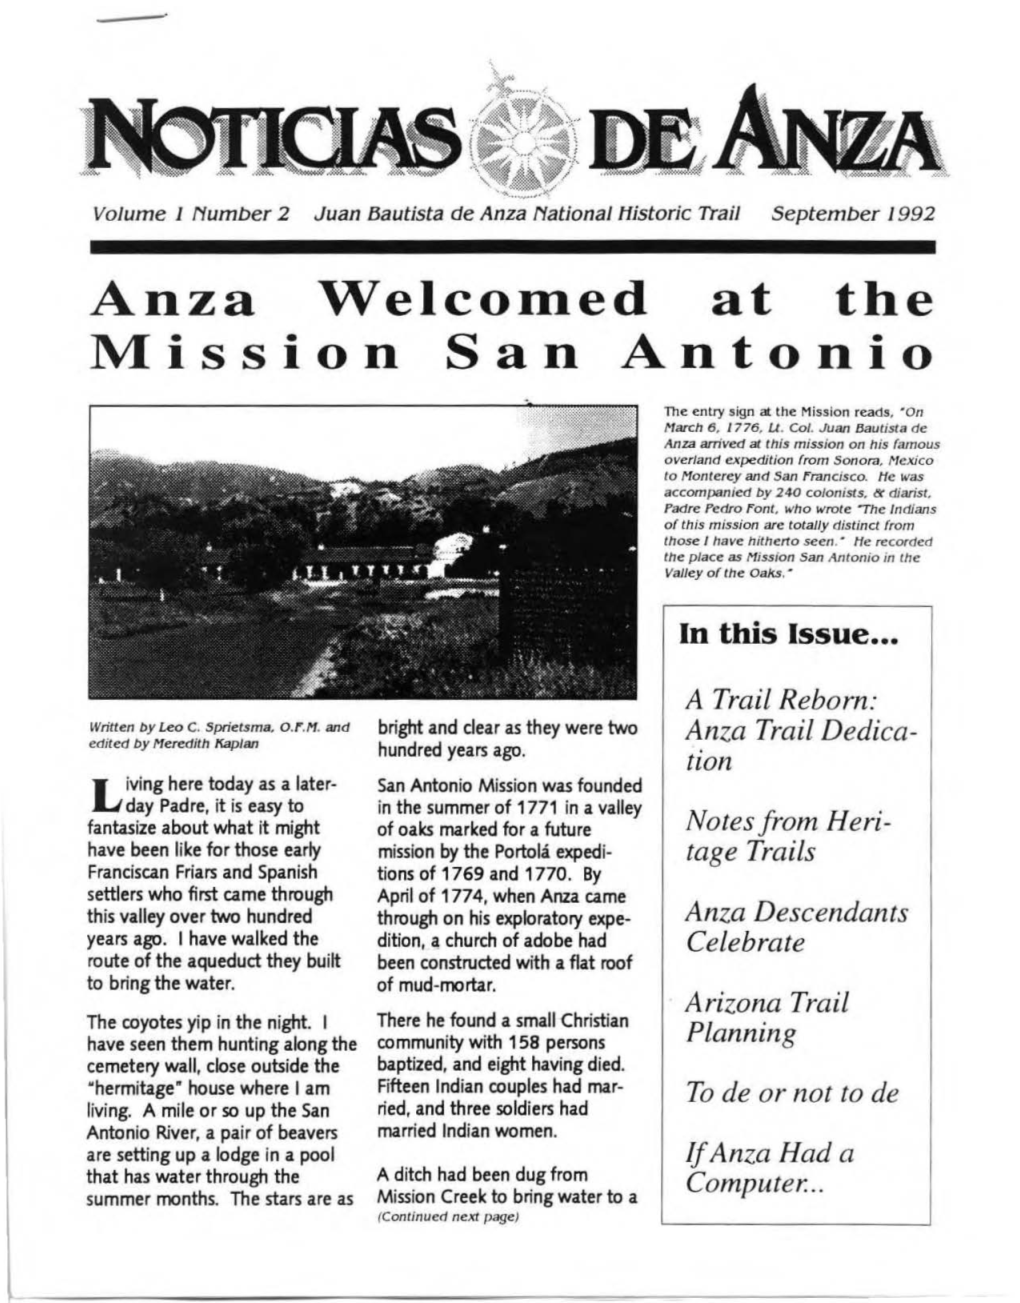 Anza Welcomed at the Mission San Antonio